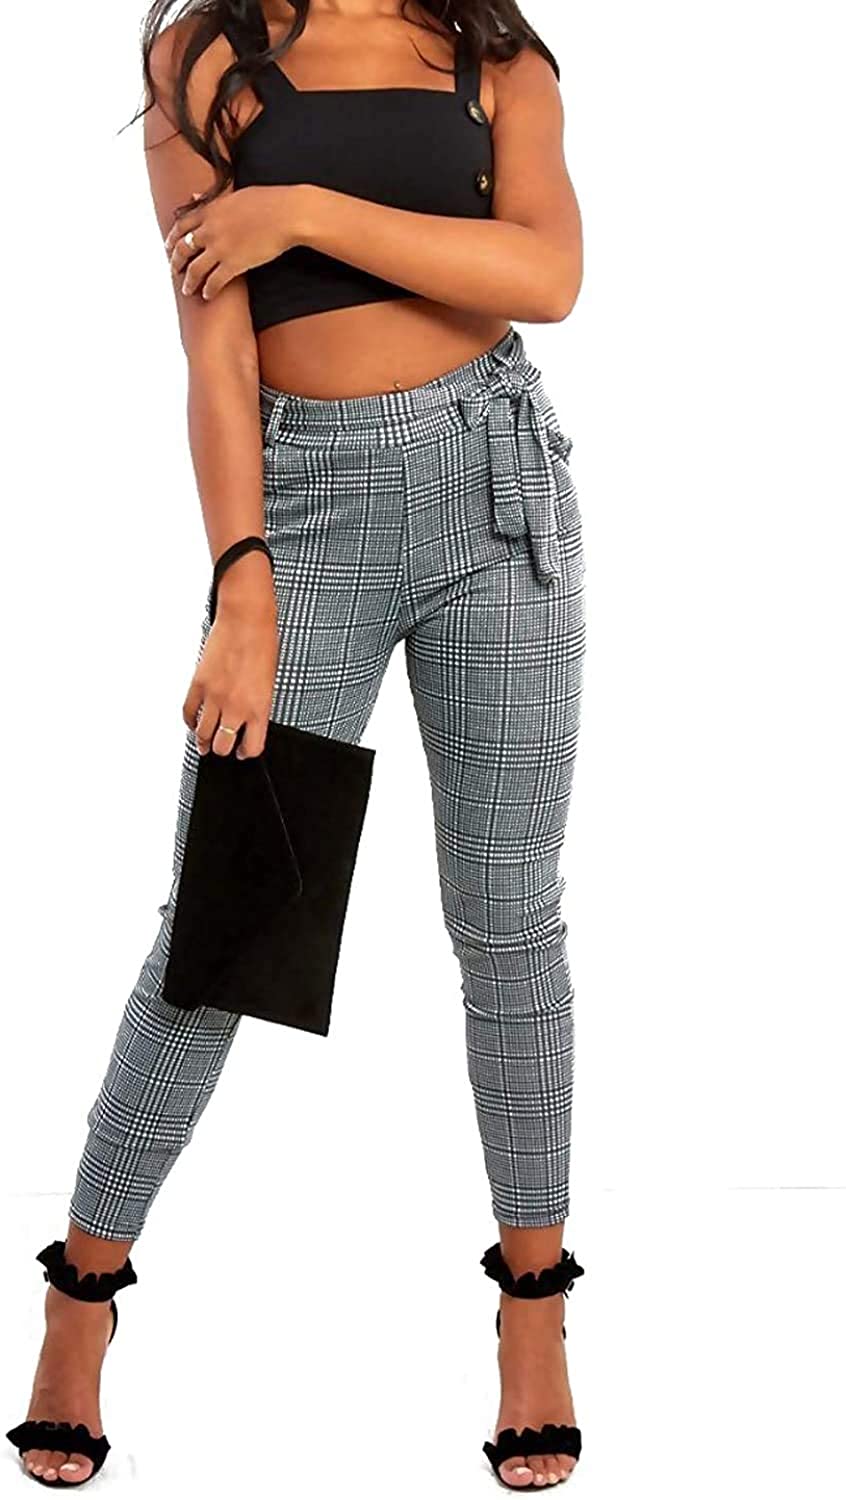 MIXLOT New Womens Ladies Sexy Gingham Check Belted Trousers Ladies High Waist Leggings Causal Fit Pants Trouser